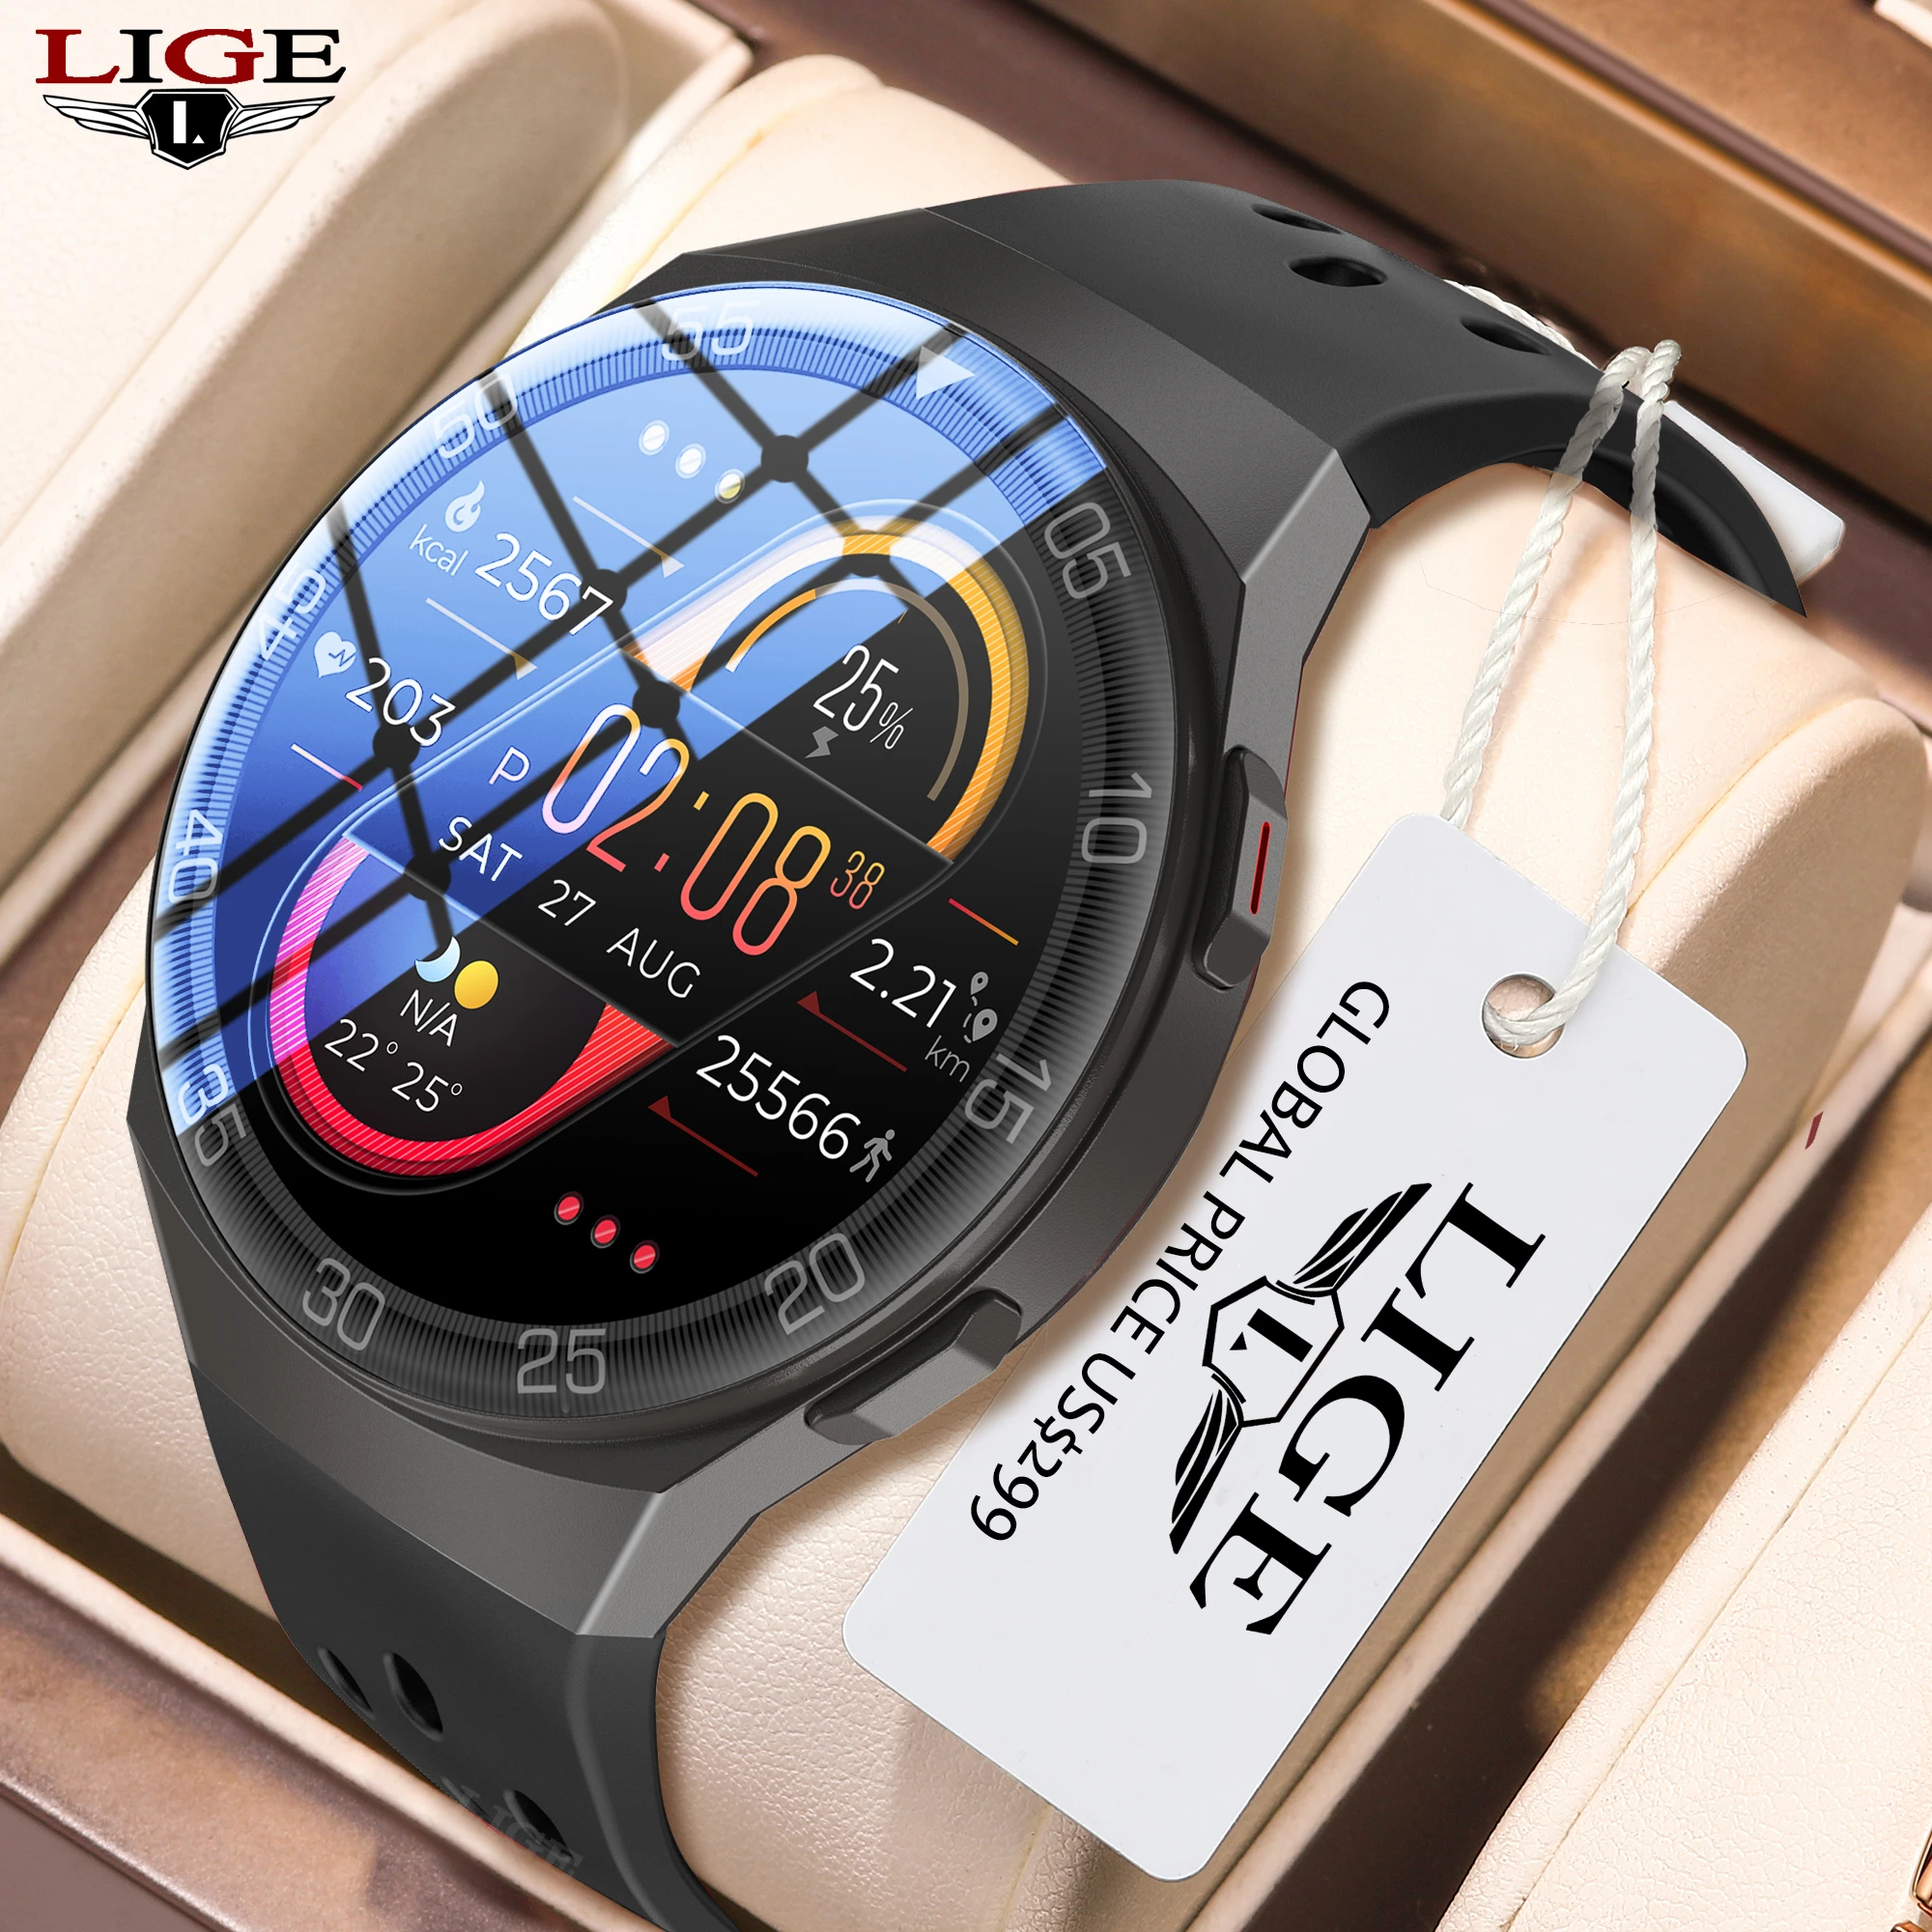 LIGE 2021 New Full Touch Screen Fitness Tracker Smart Watch Men Heart Rate Monitor Blood Pressure Smartwatch For Android iOS+Box |